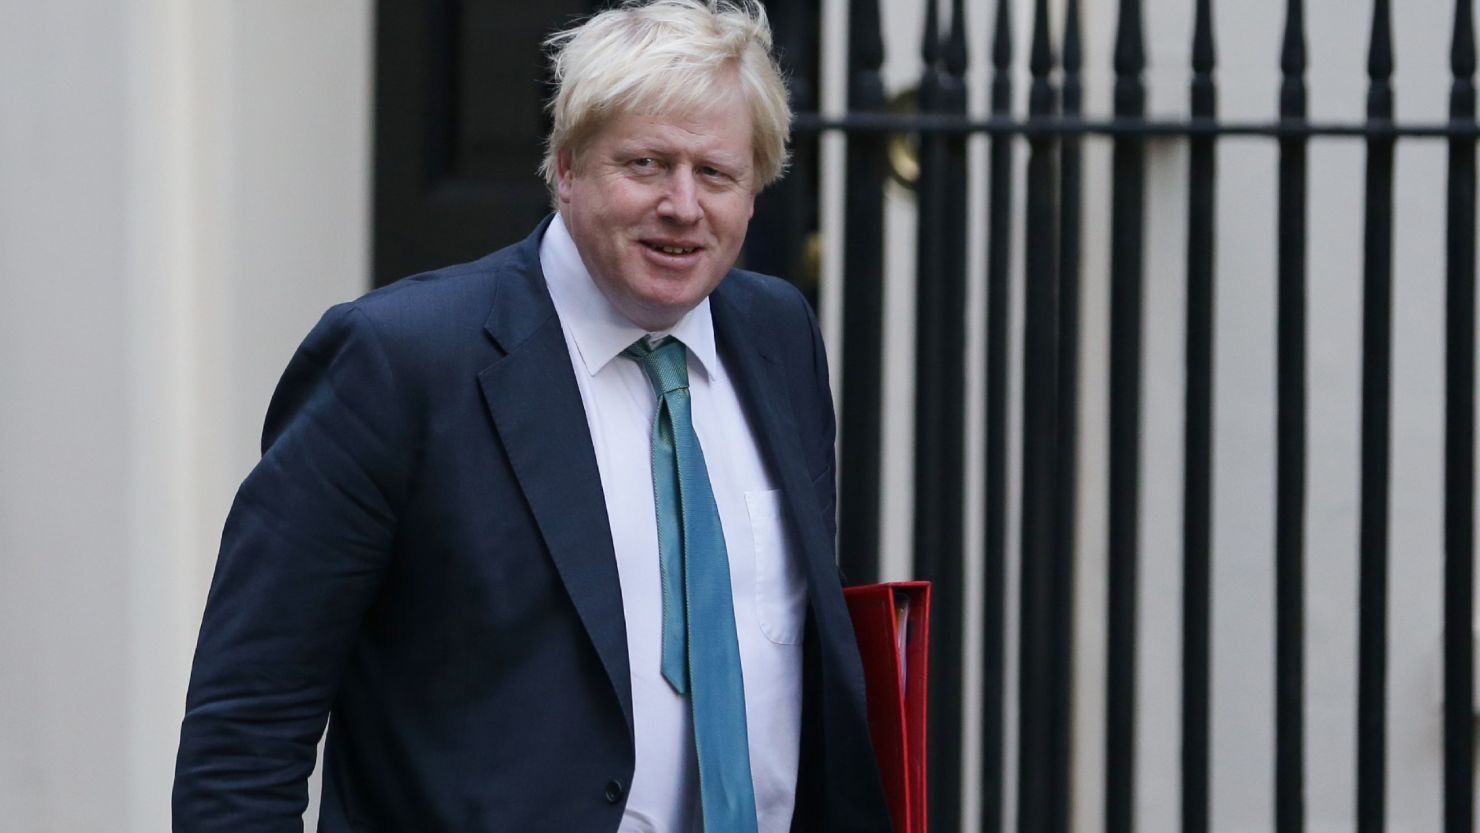 UK Foreign Secretary Boris Johnson arrives at 10 Downing St. in London for an October Cabinet meeting.